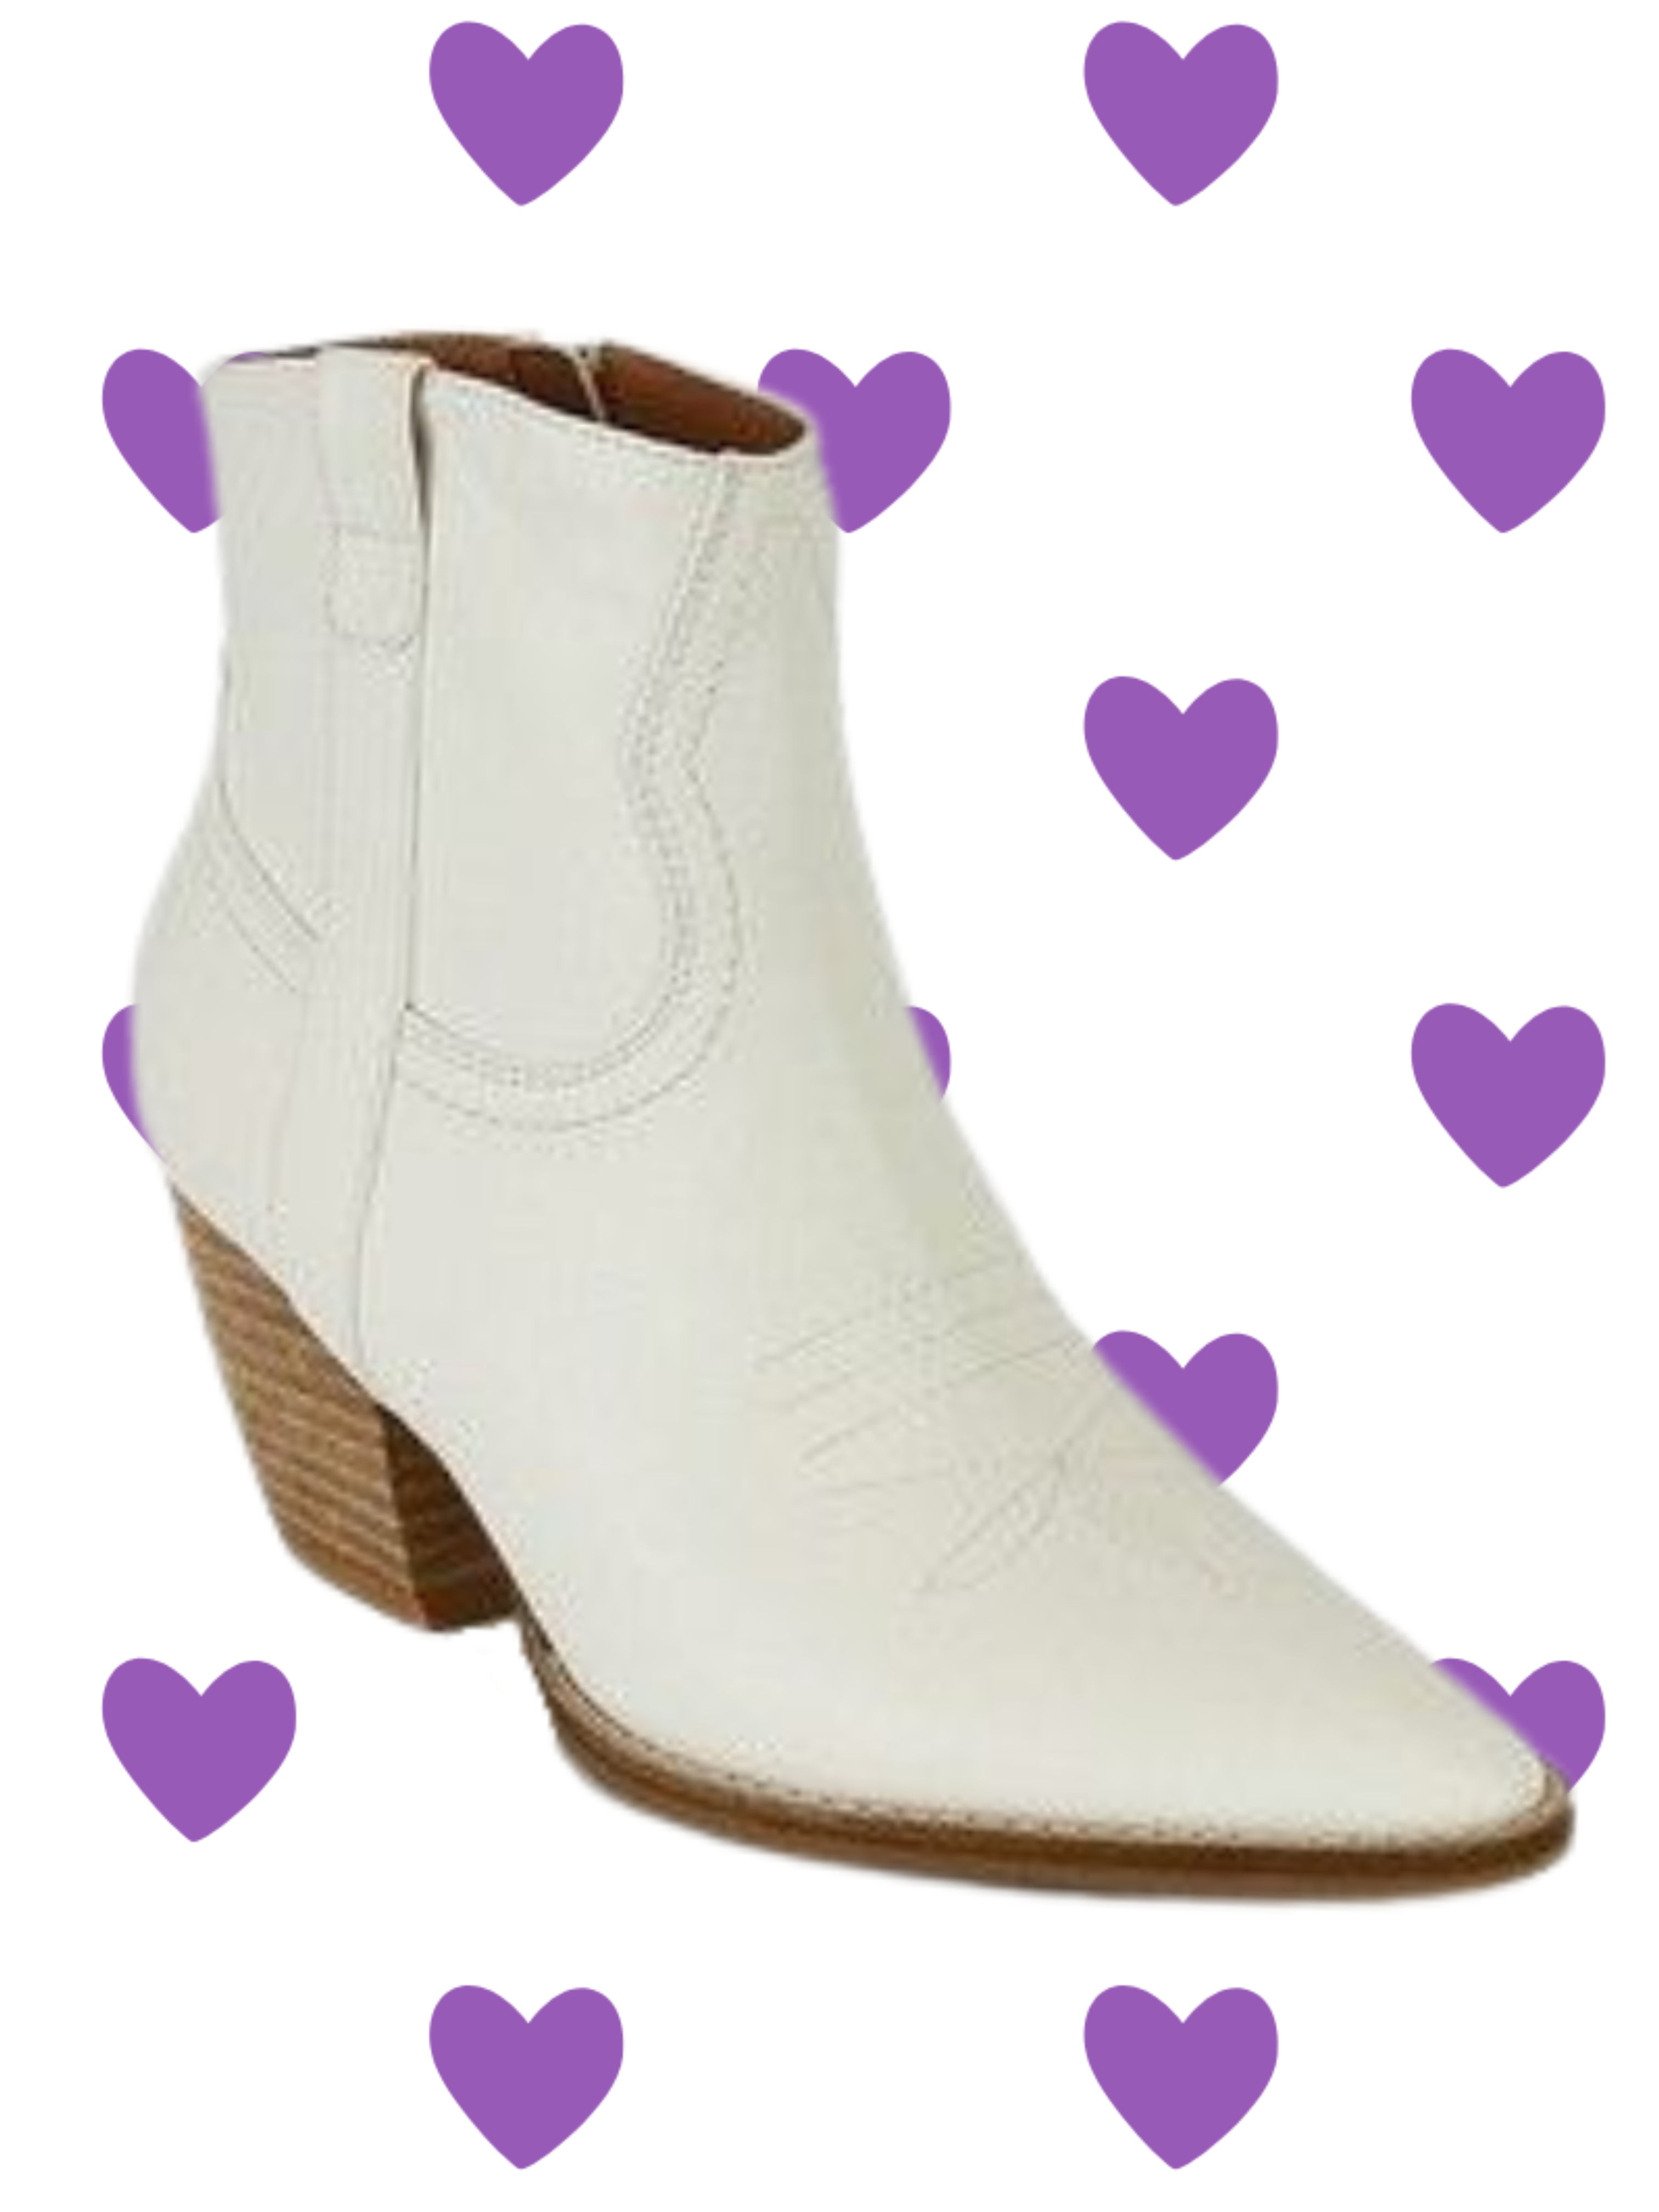 Cool and Casual Bootie